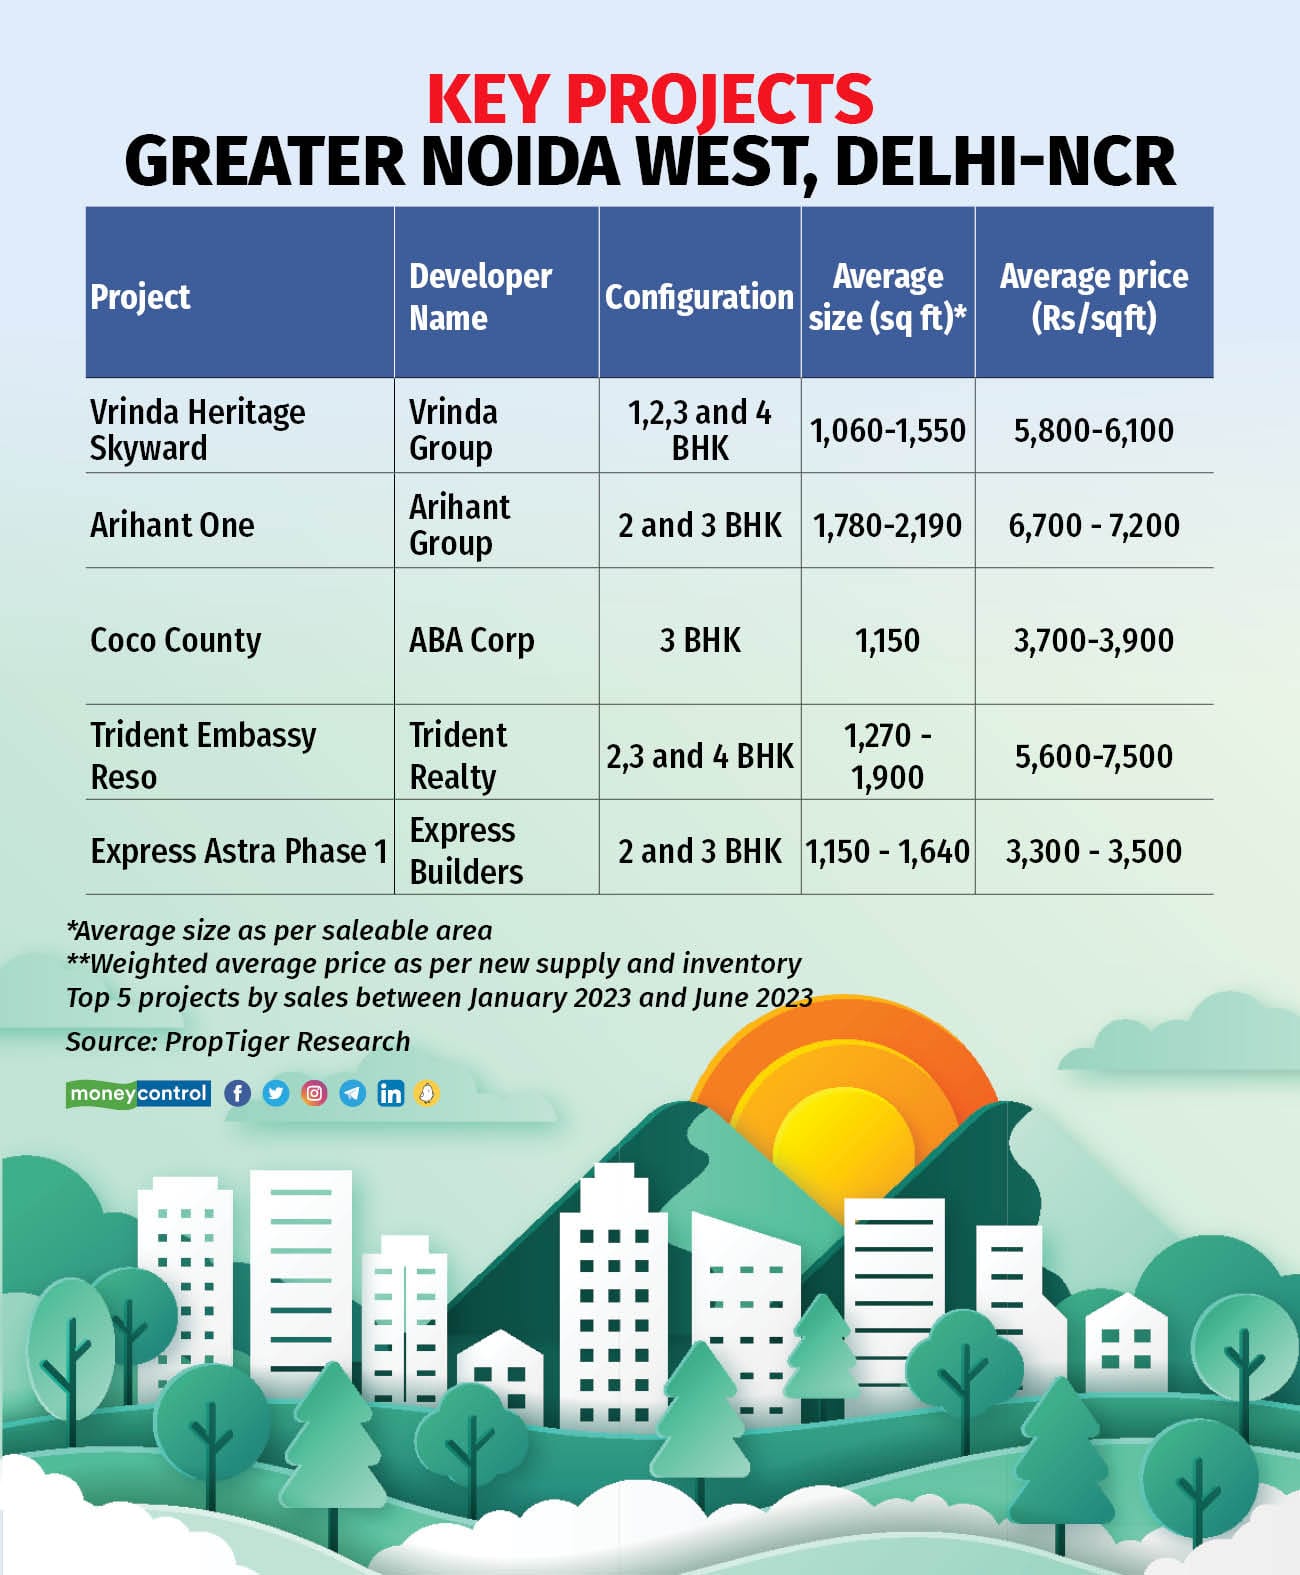 Key Projects Greater Noida West, Delhi-NCR